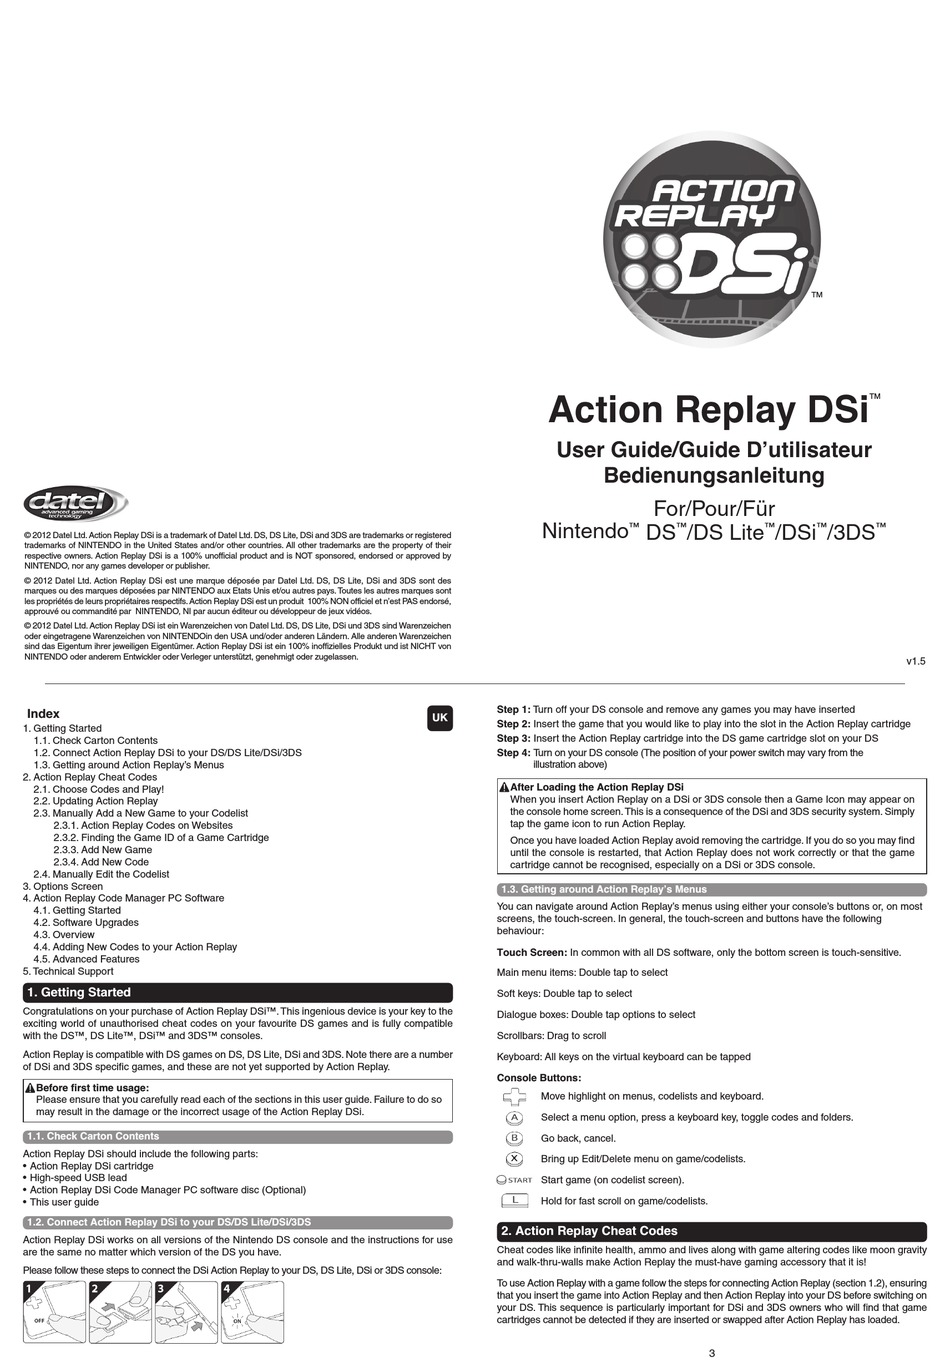  Datel Action Replay Cheat System (3DS/DSi XL/DSi/DS